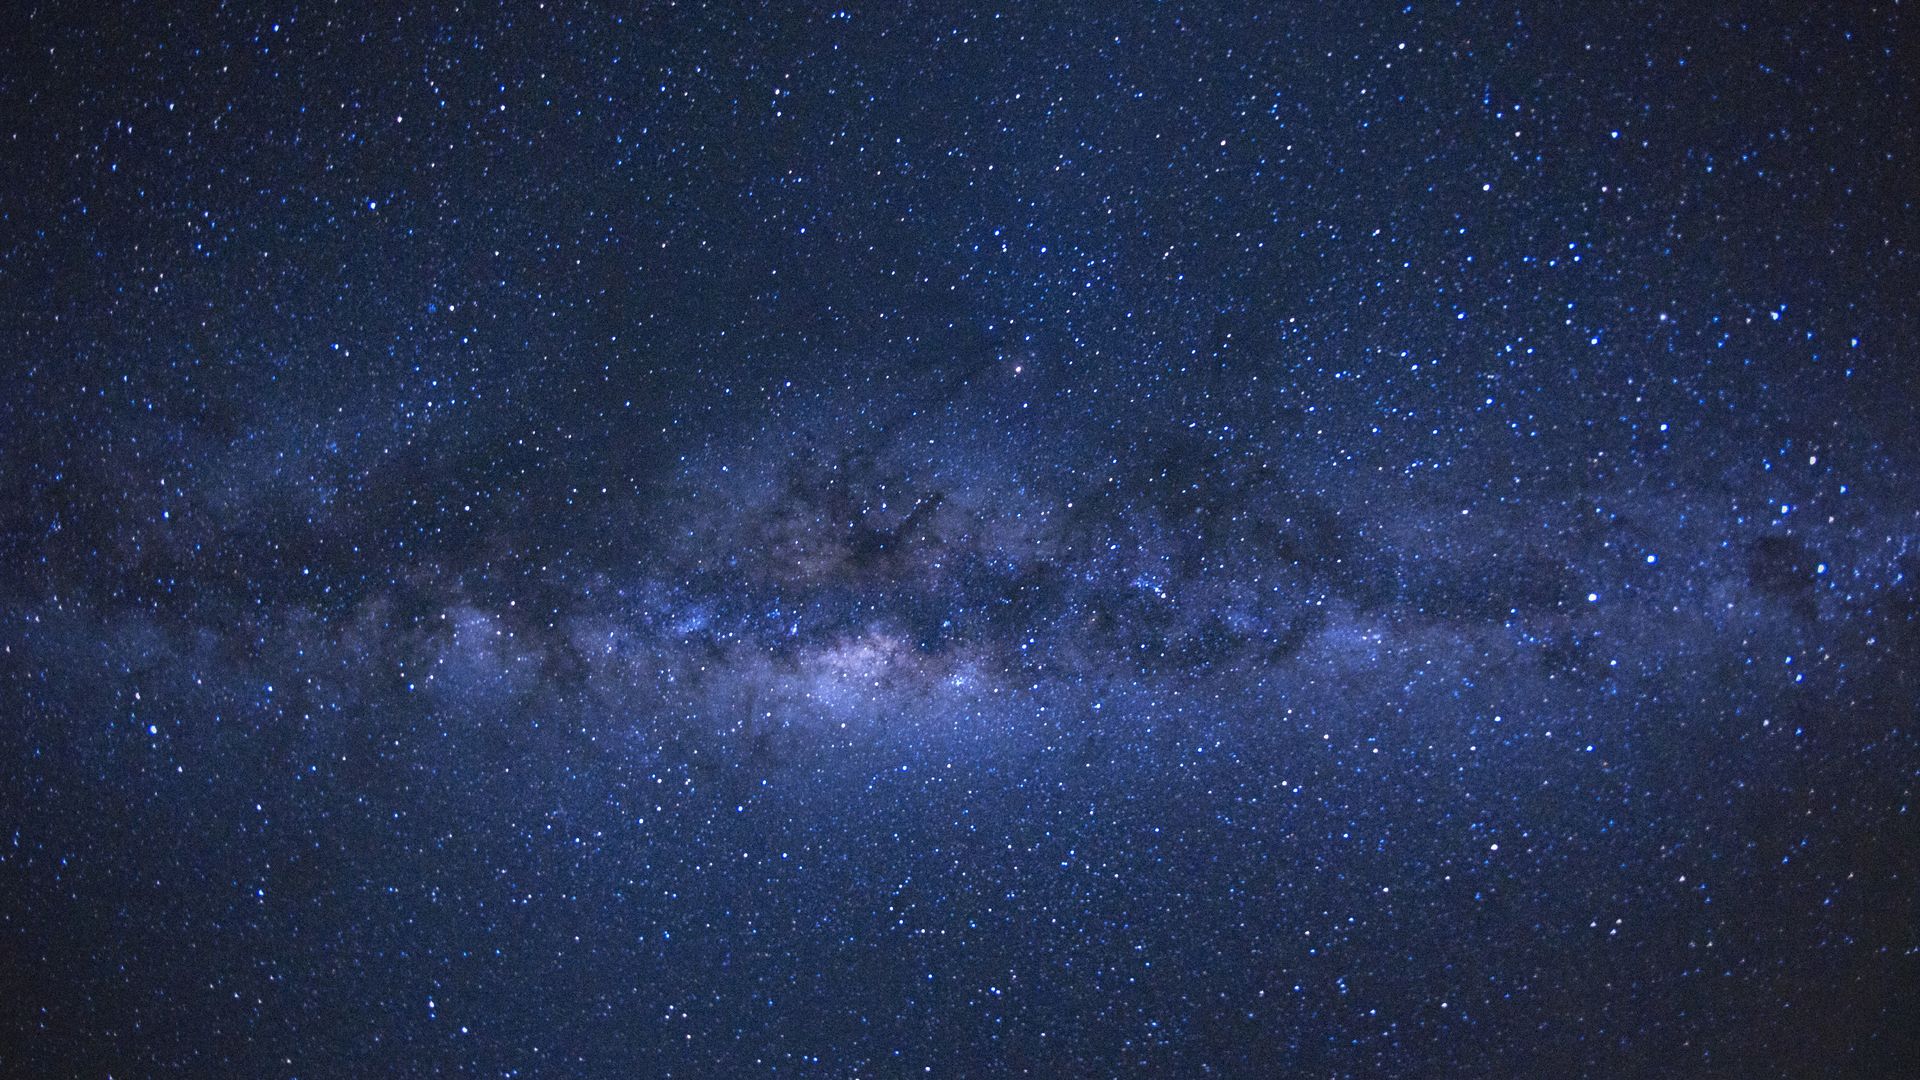 The Milky Way as seen from the French island of Reunion in the Indian Ocean.